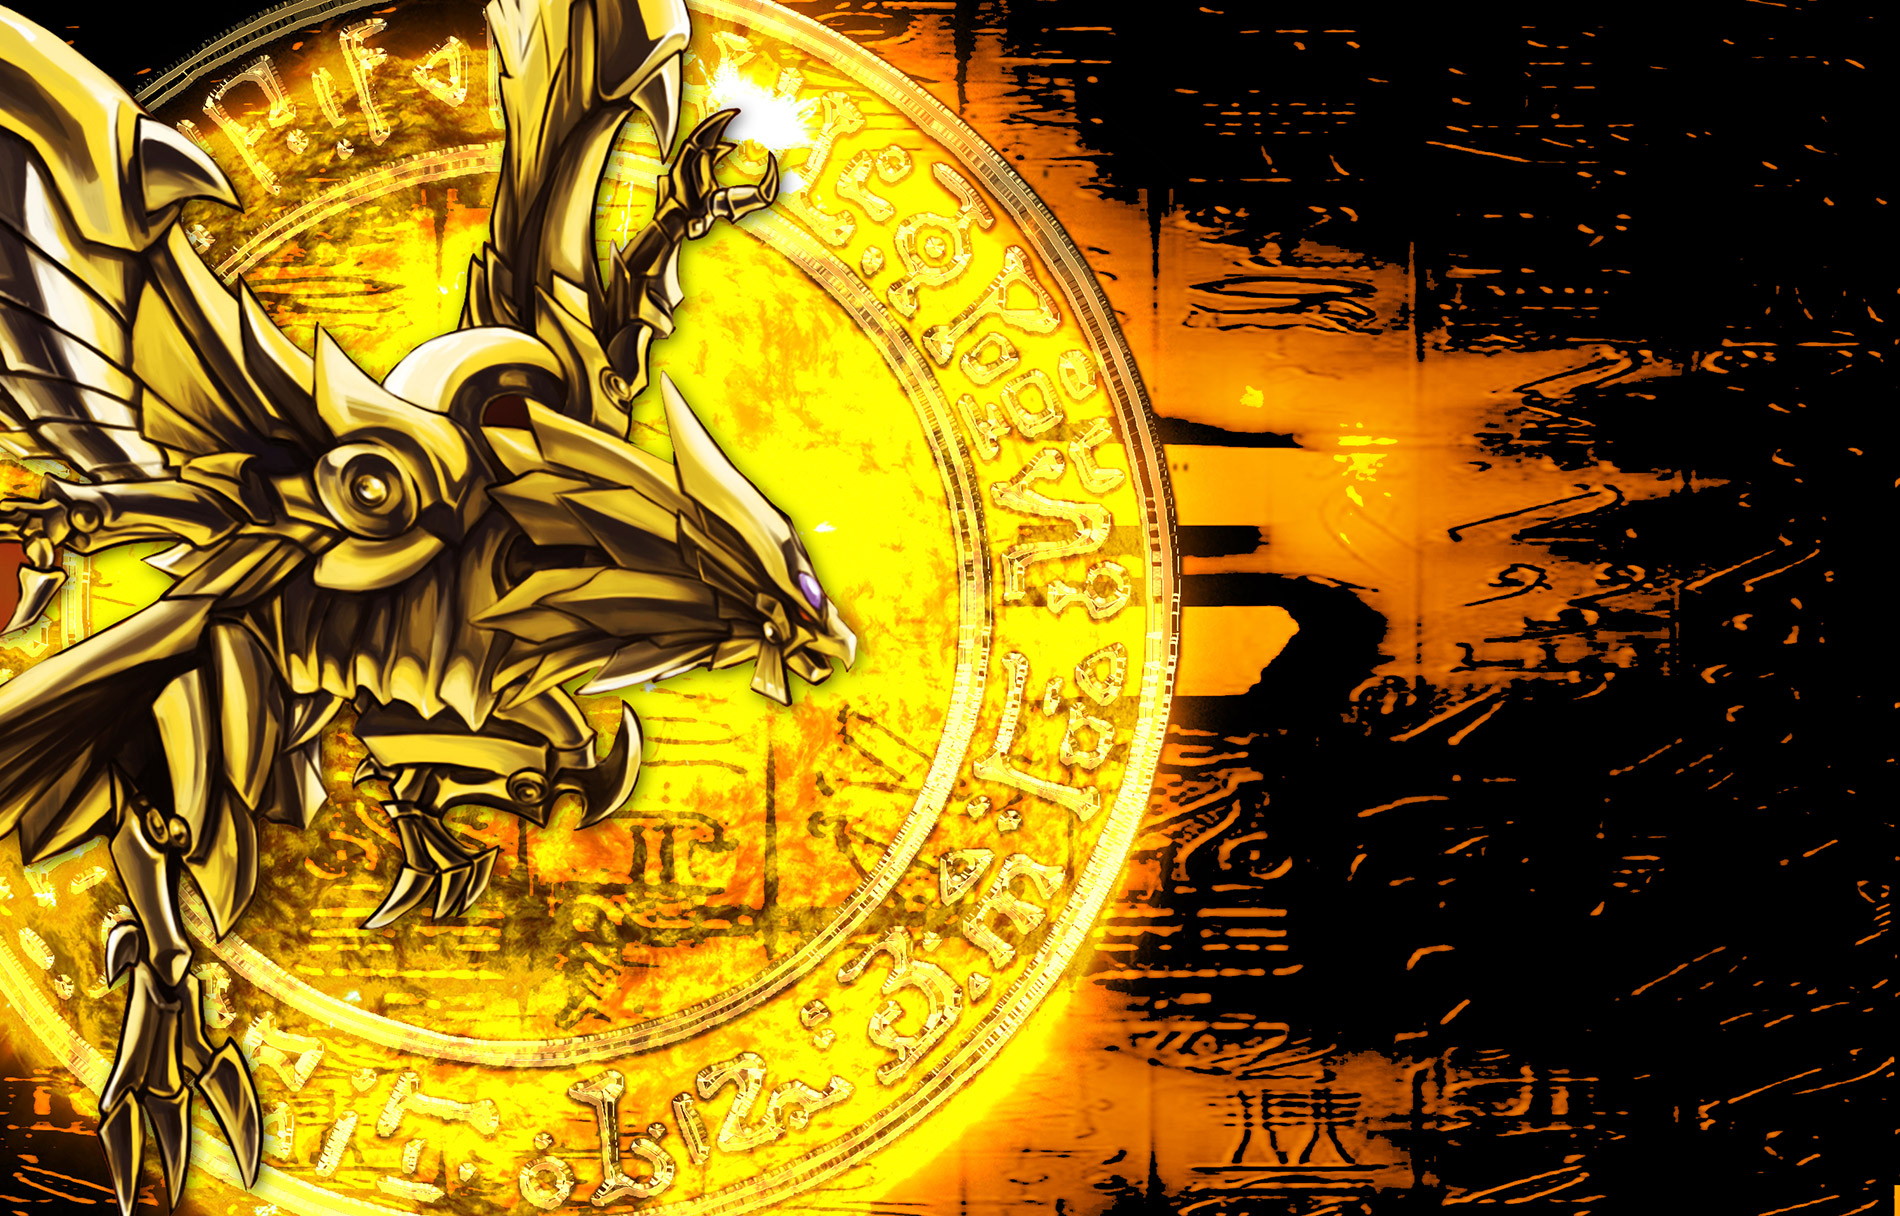 The Winged Dragon Of Ra Yu Gi Oh Duel Monsters Wallpaper